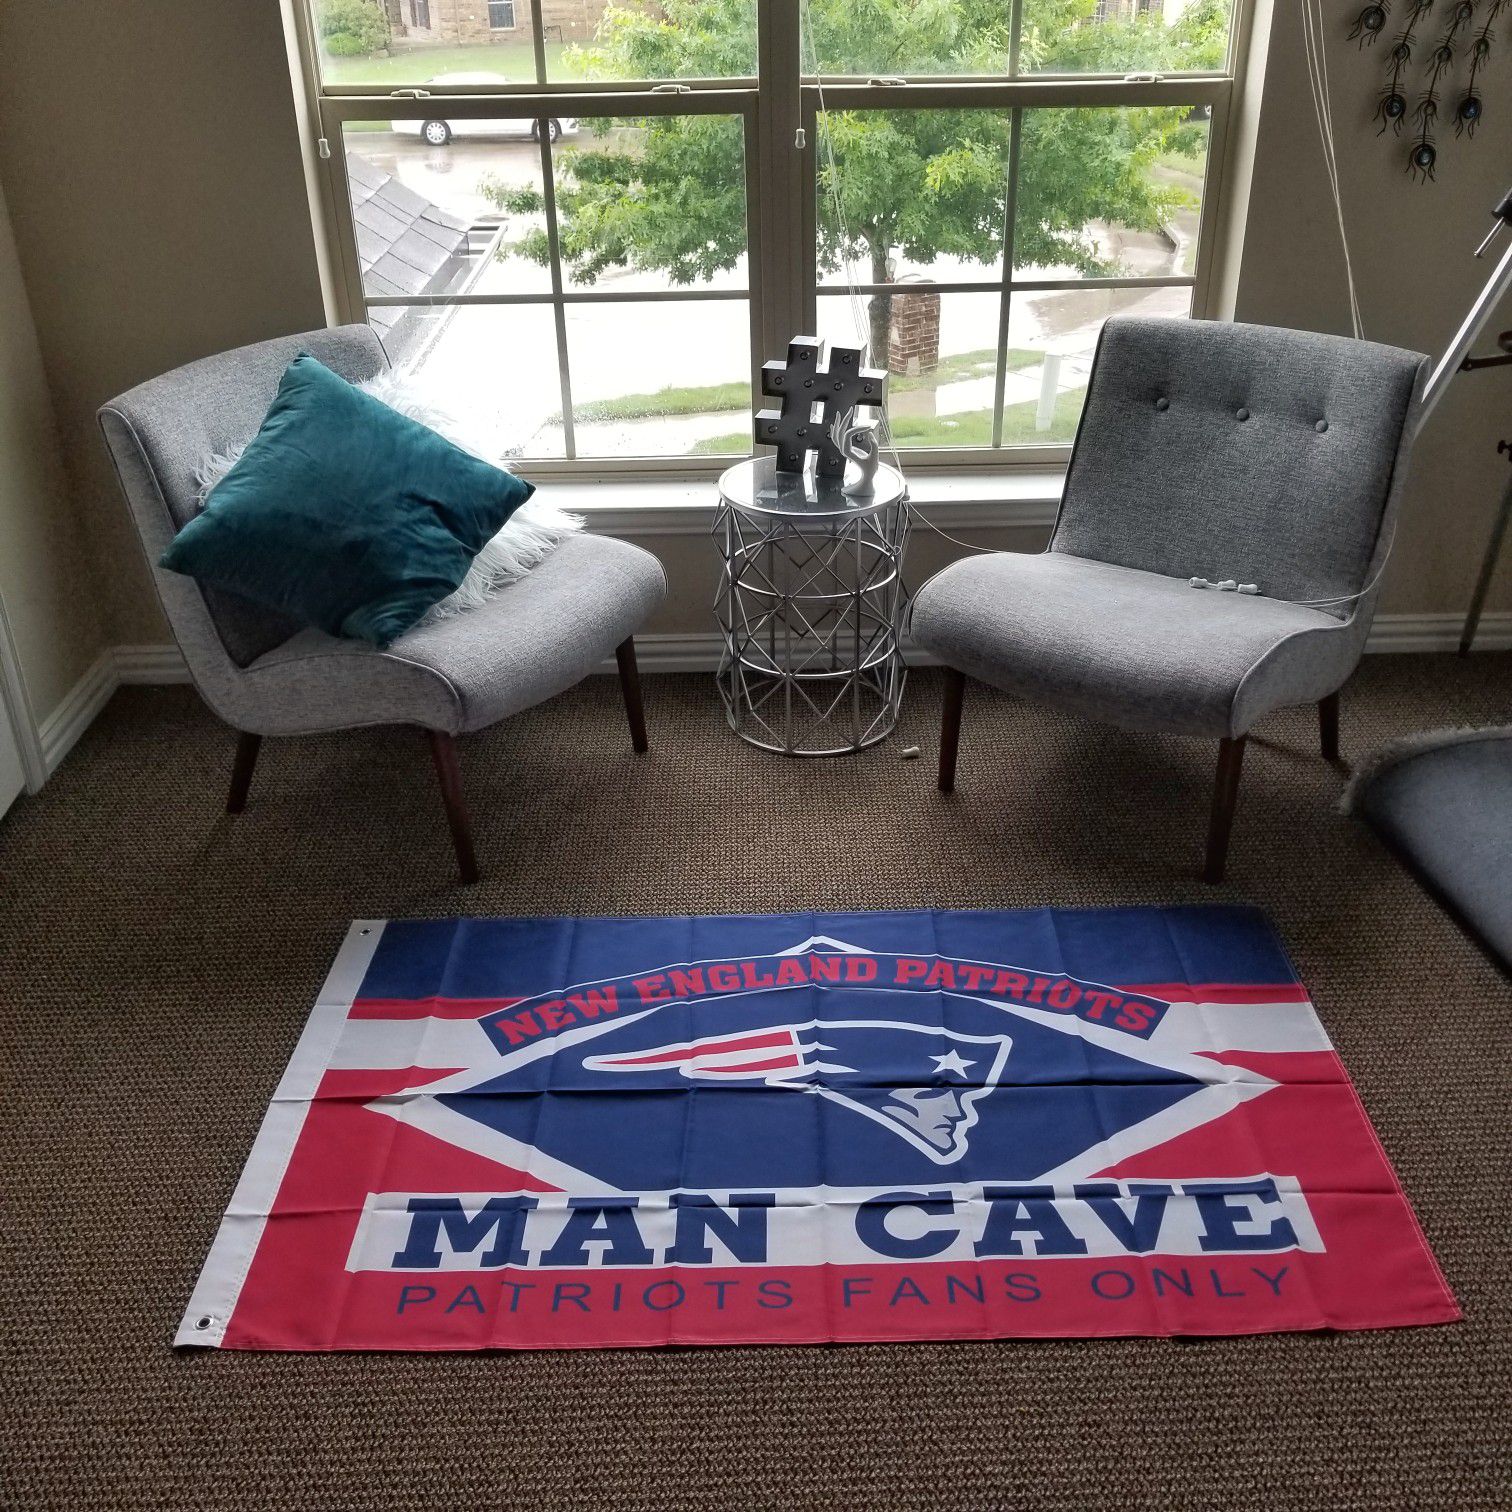 New England Patriots Man Cave Members Onky New Flag Banner 3x5 Ft F7